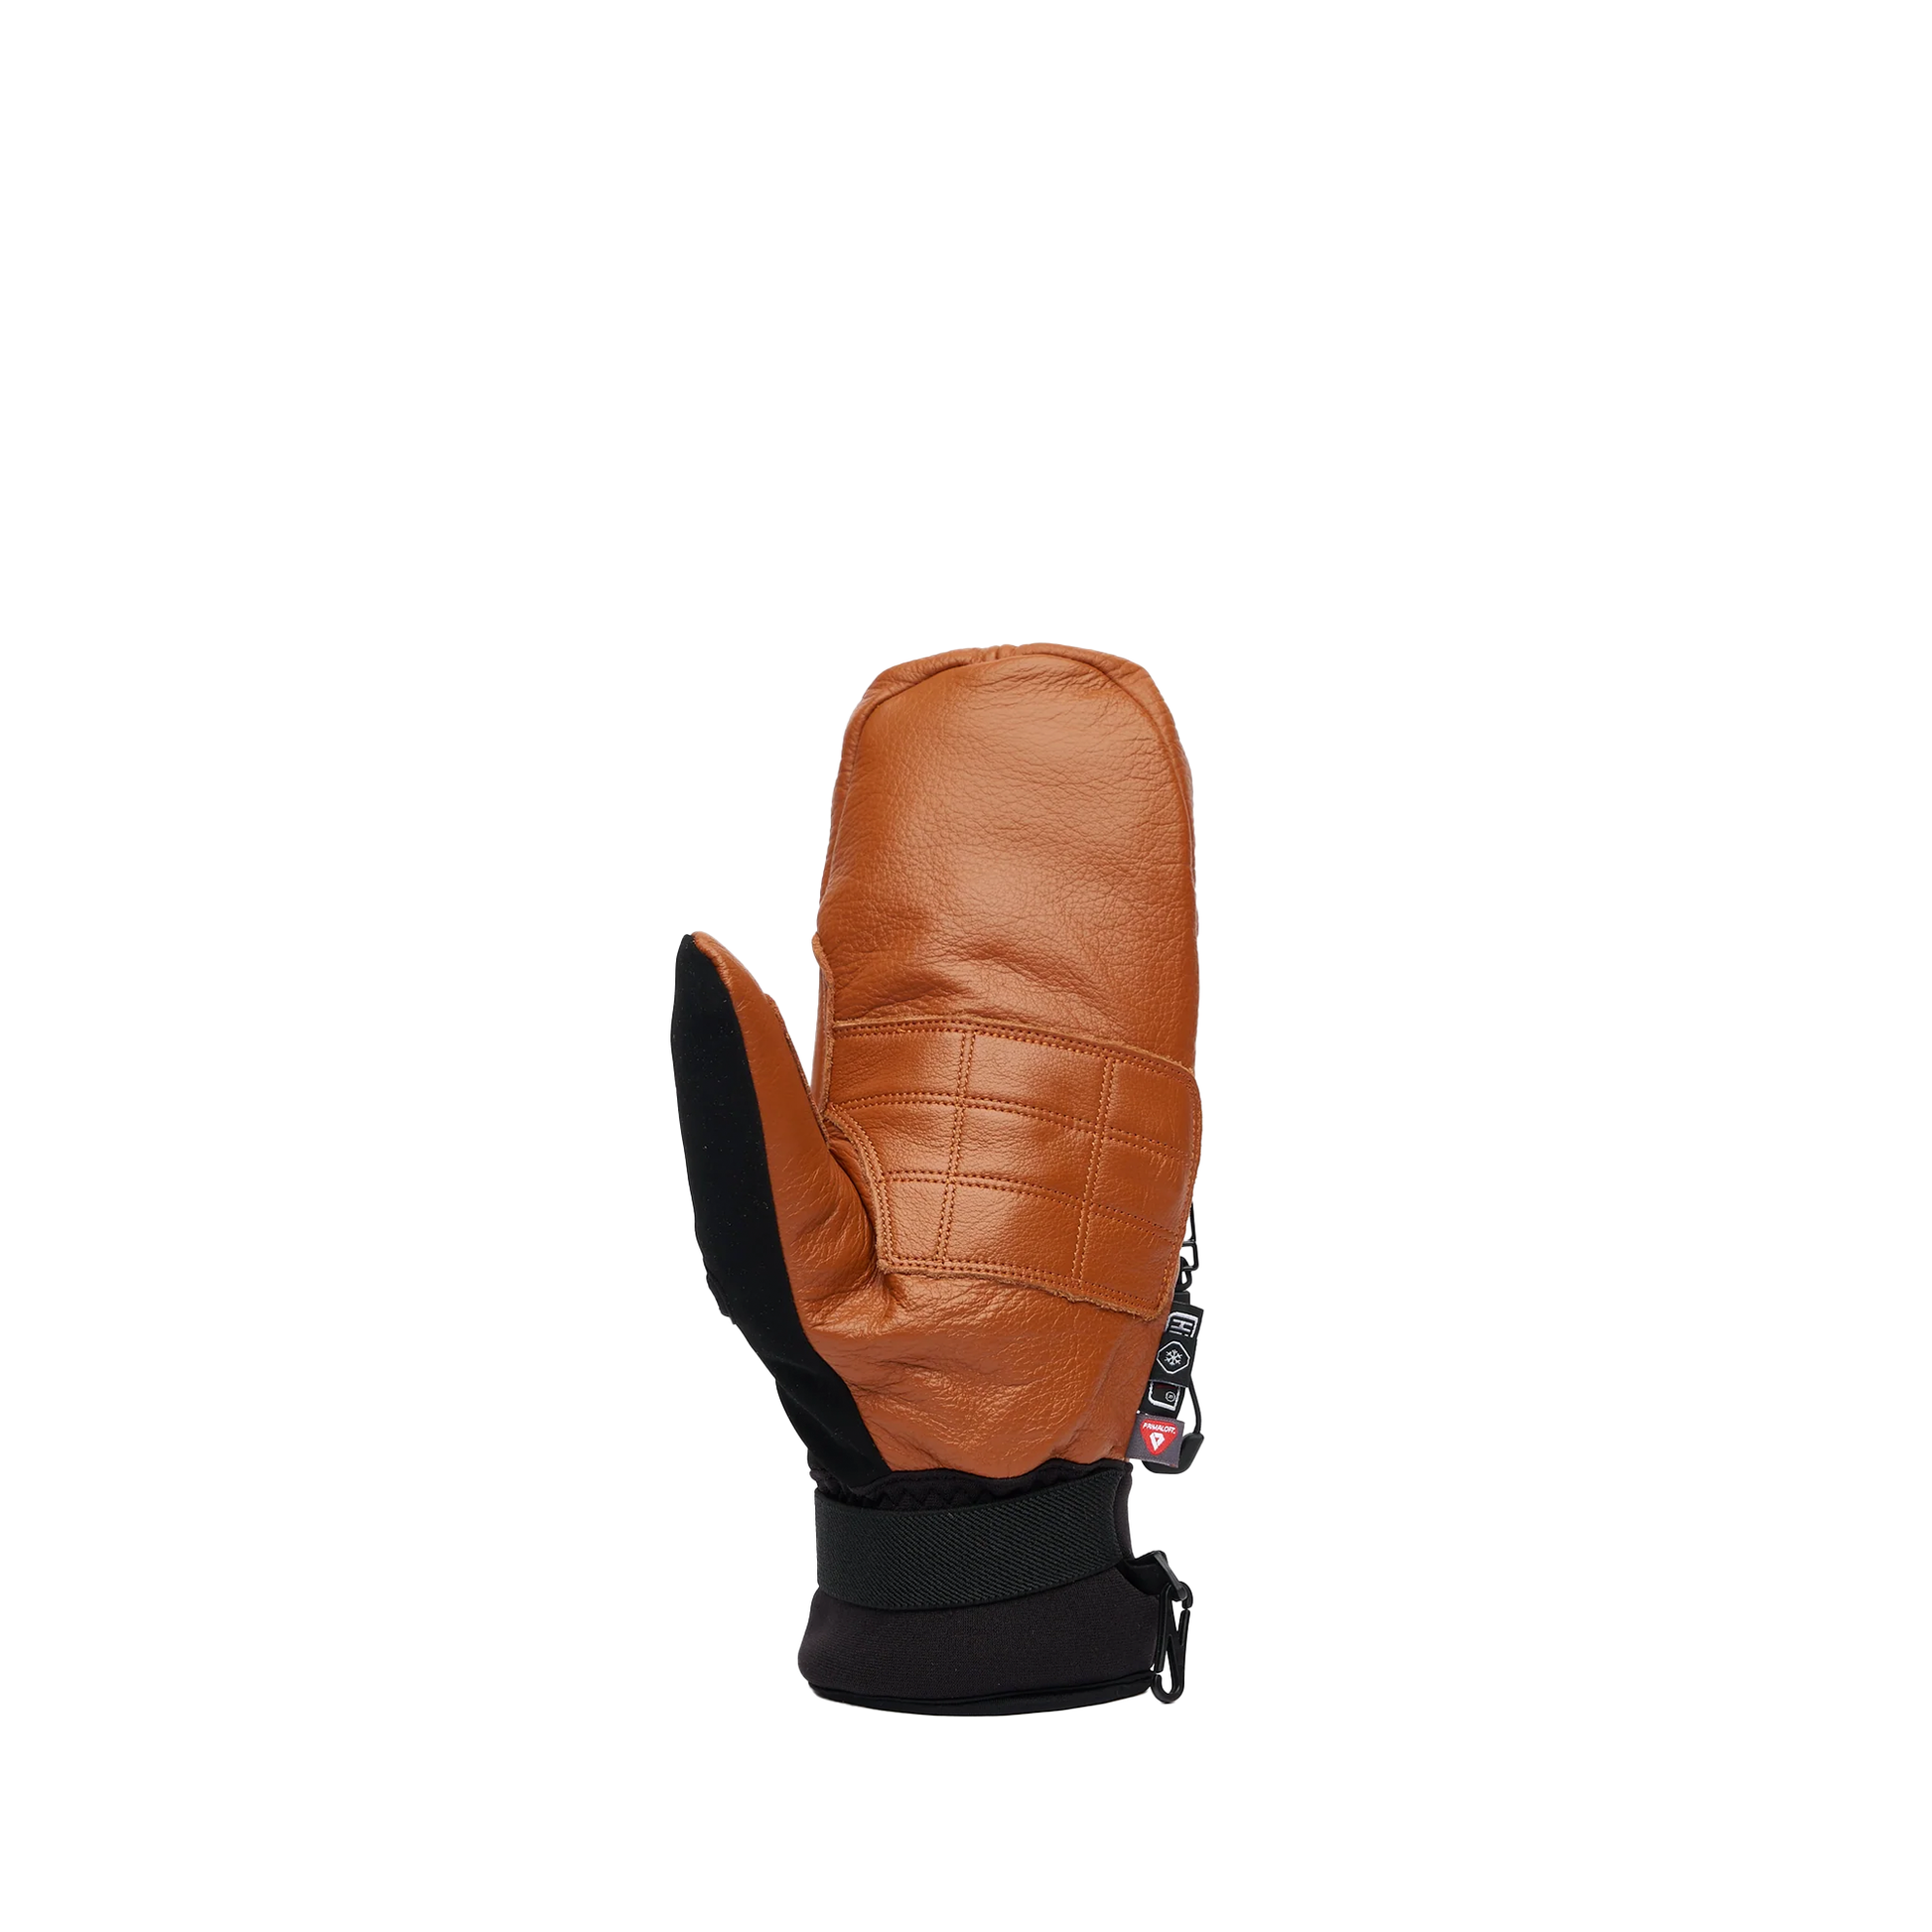 Hand Out Baldface Low Guide Mittens Tan Snow Gloves